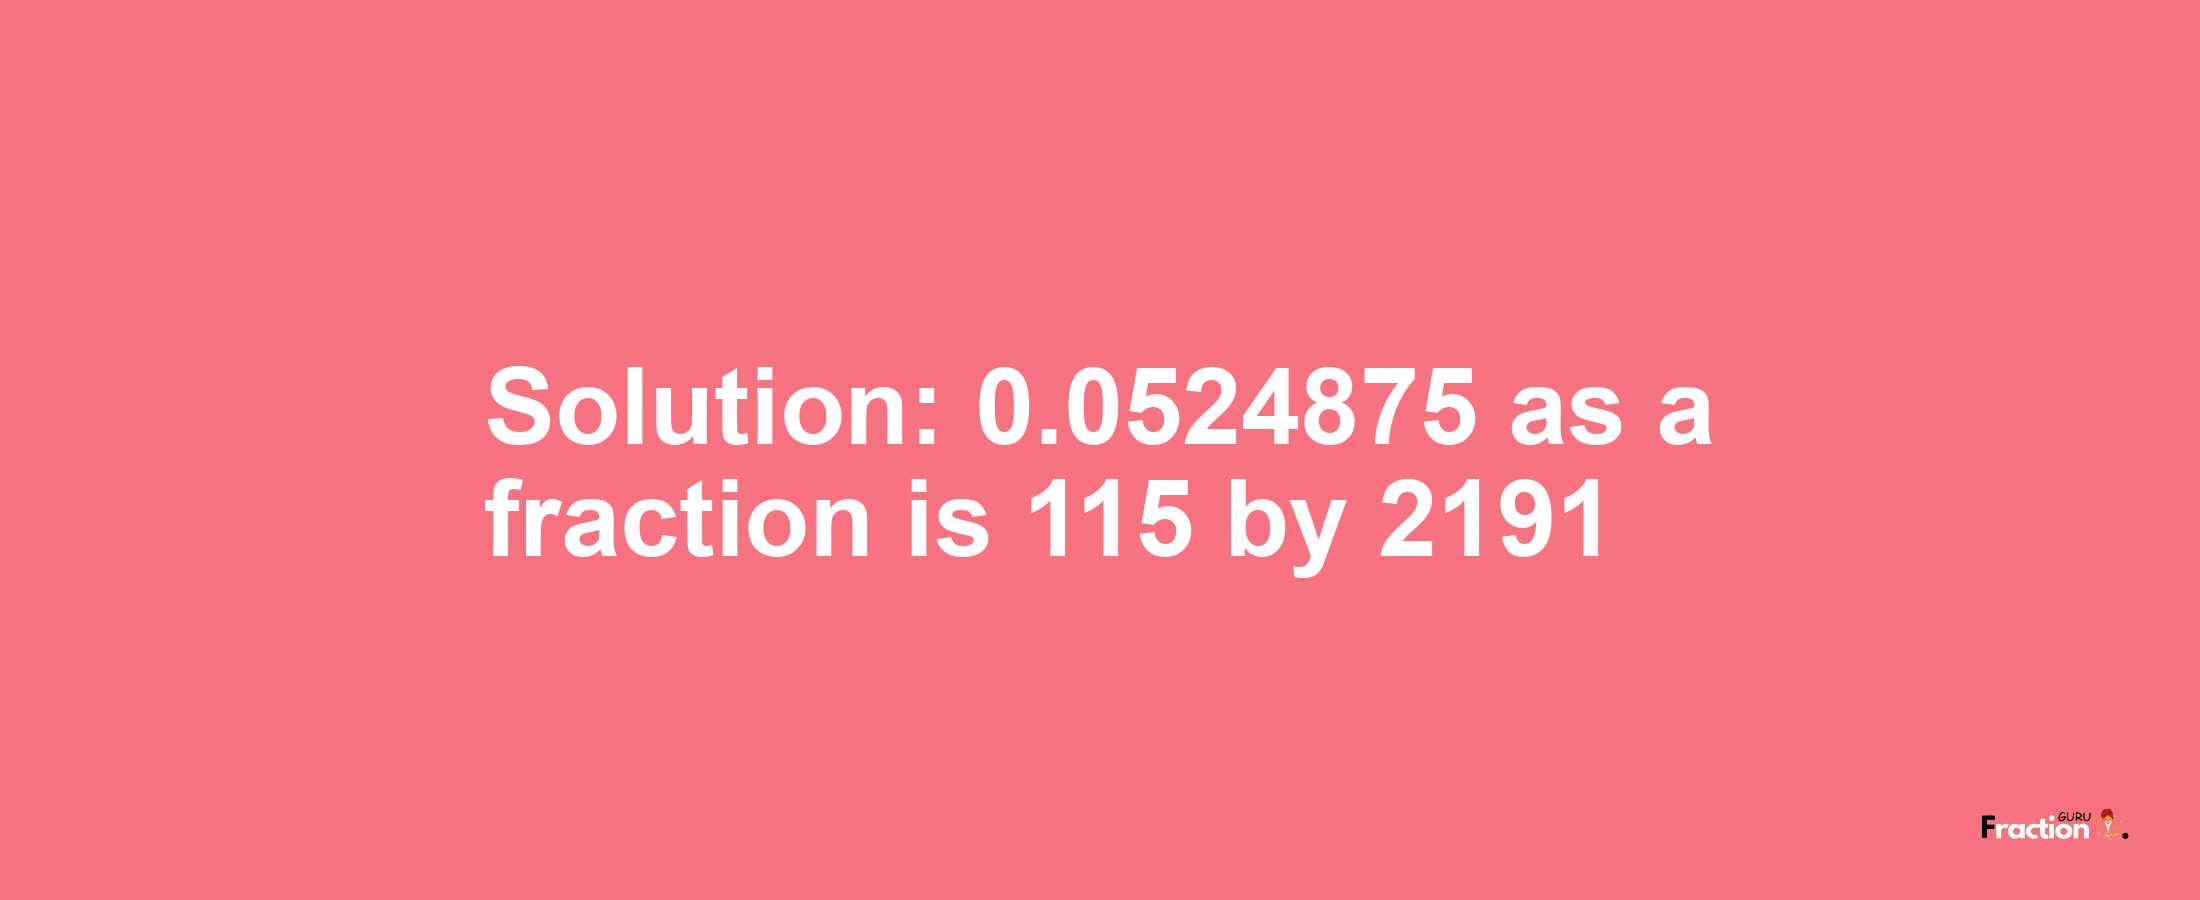 Solution:0.0524875 as a fraction is 115/2191